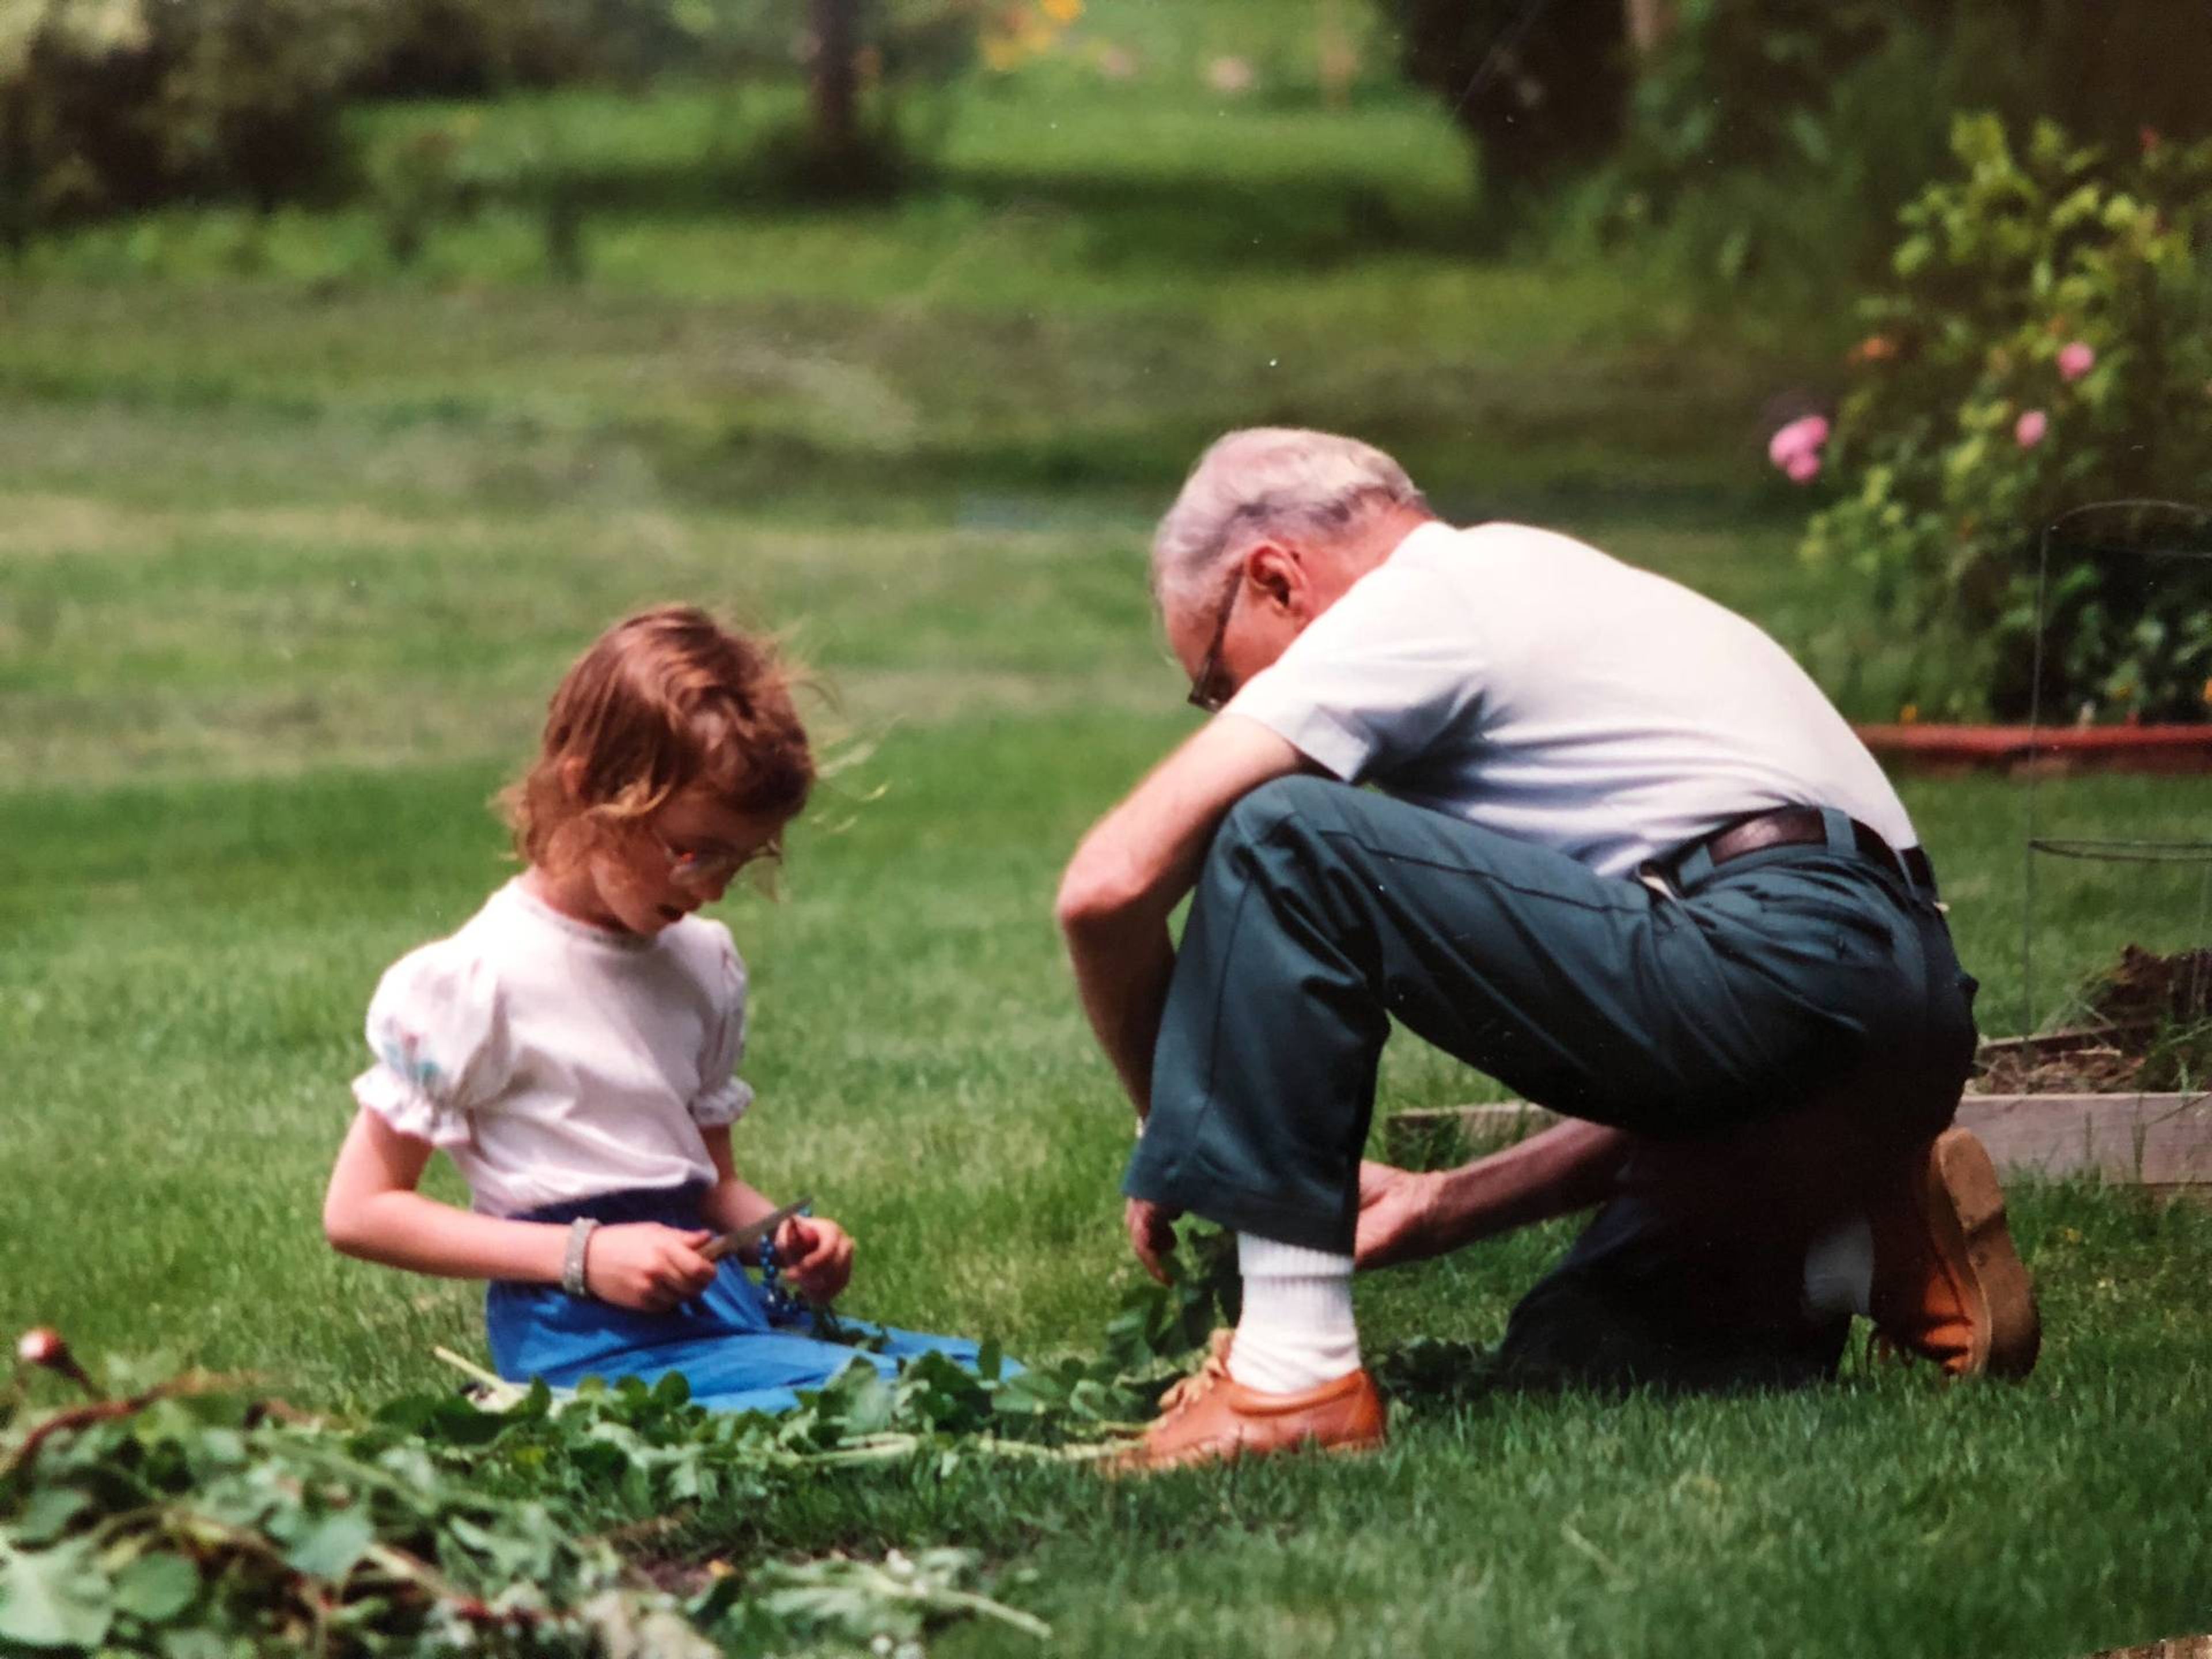 Young Karyn with her grandpa Clyde Tomlinson in the garden in Dassel, MN